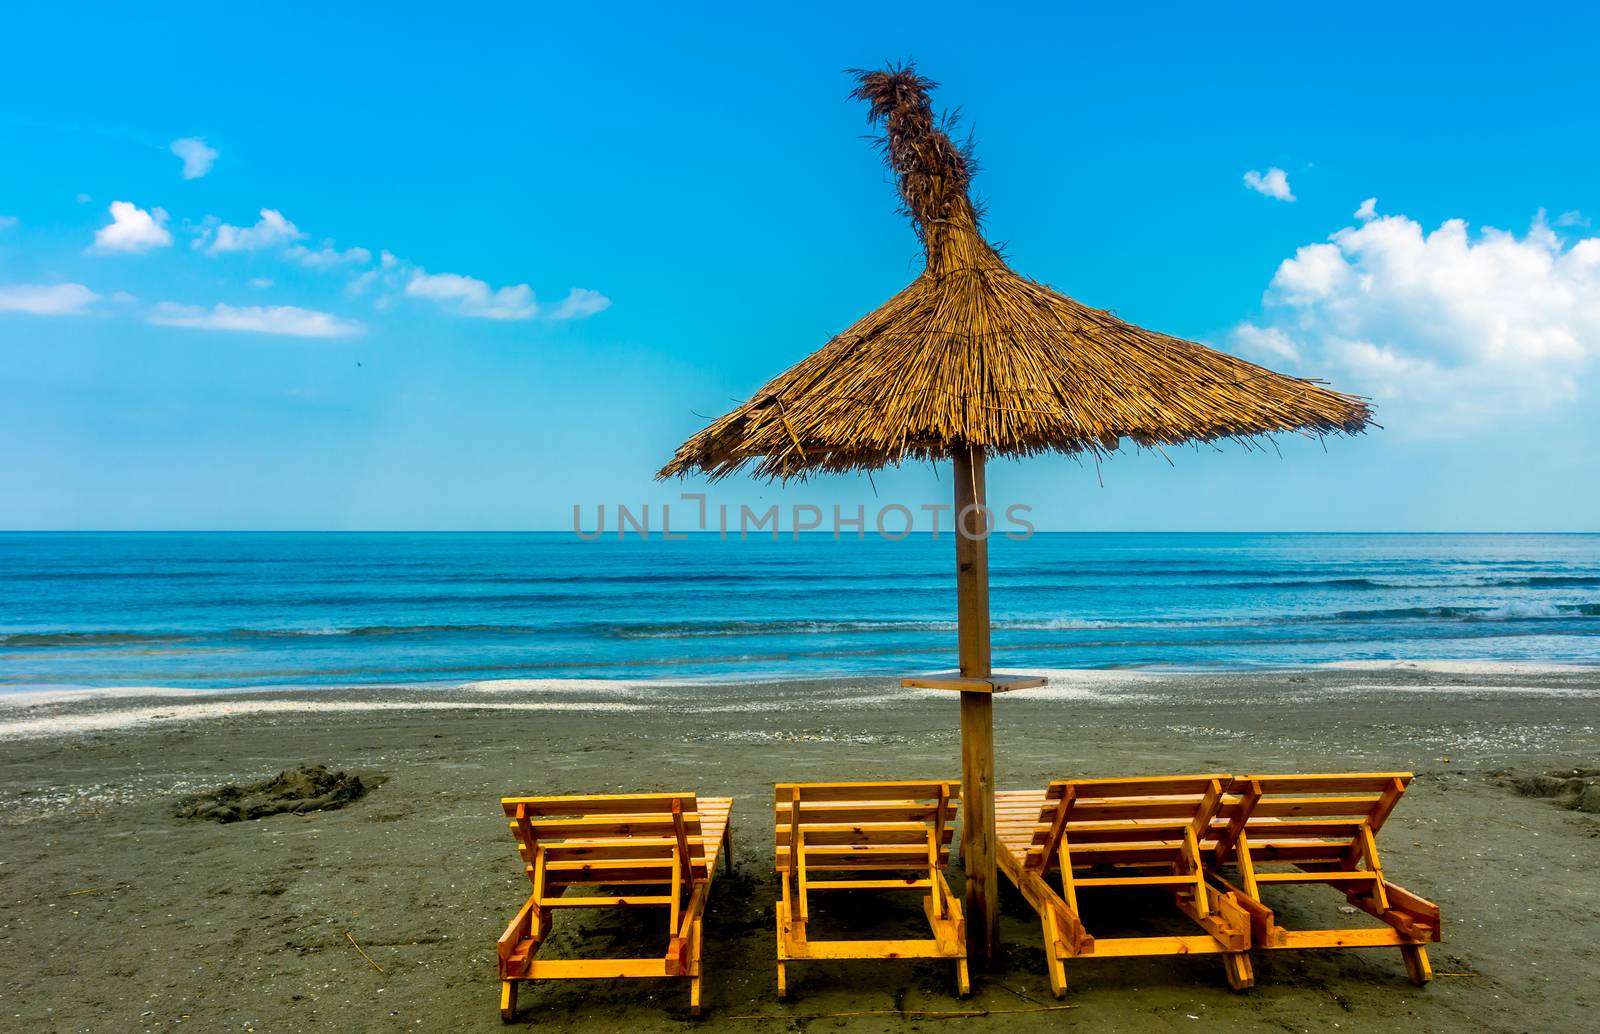 Seaside beach with lounge chairs and straw umbrella.